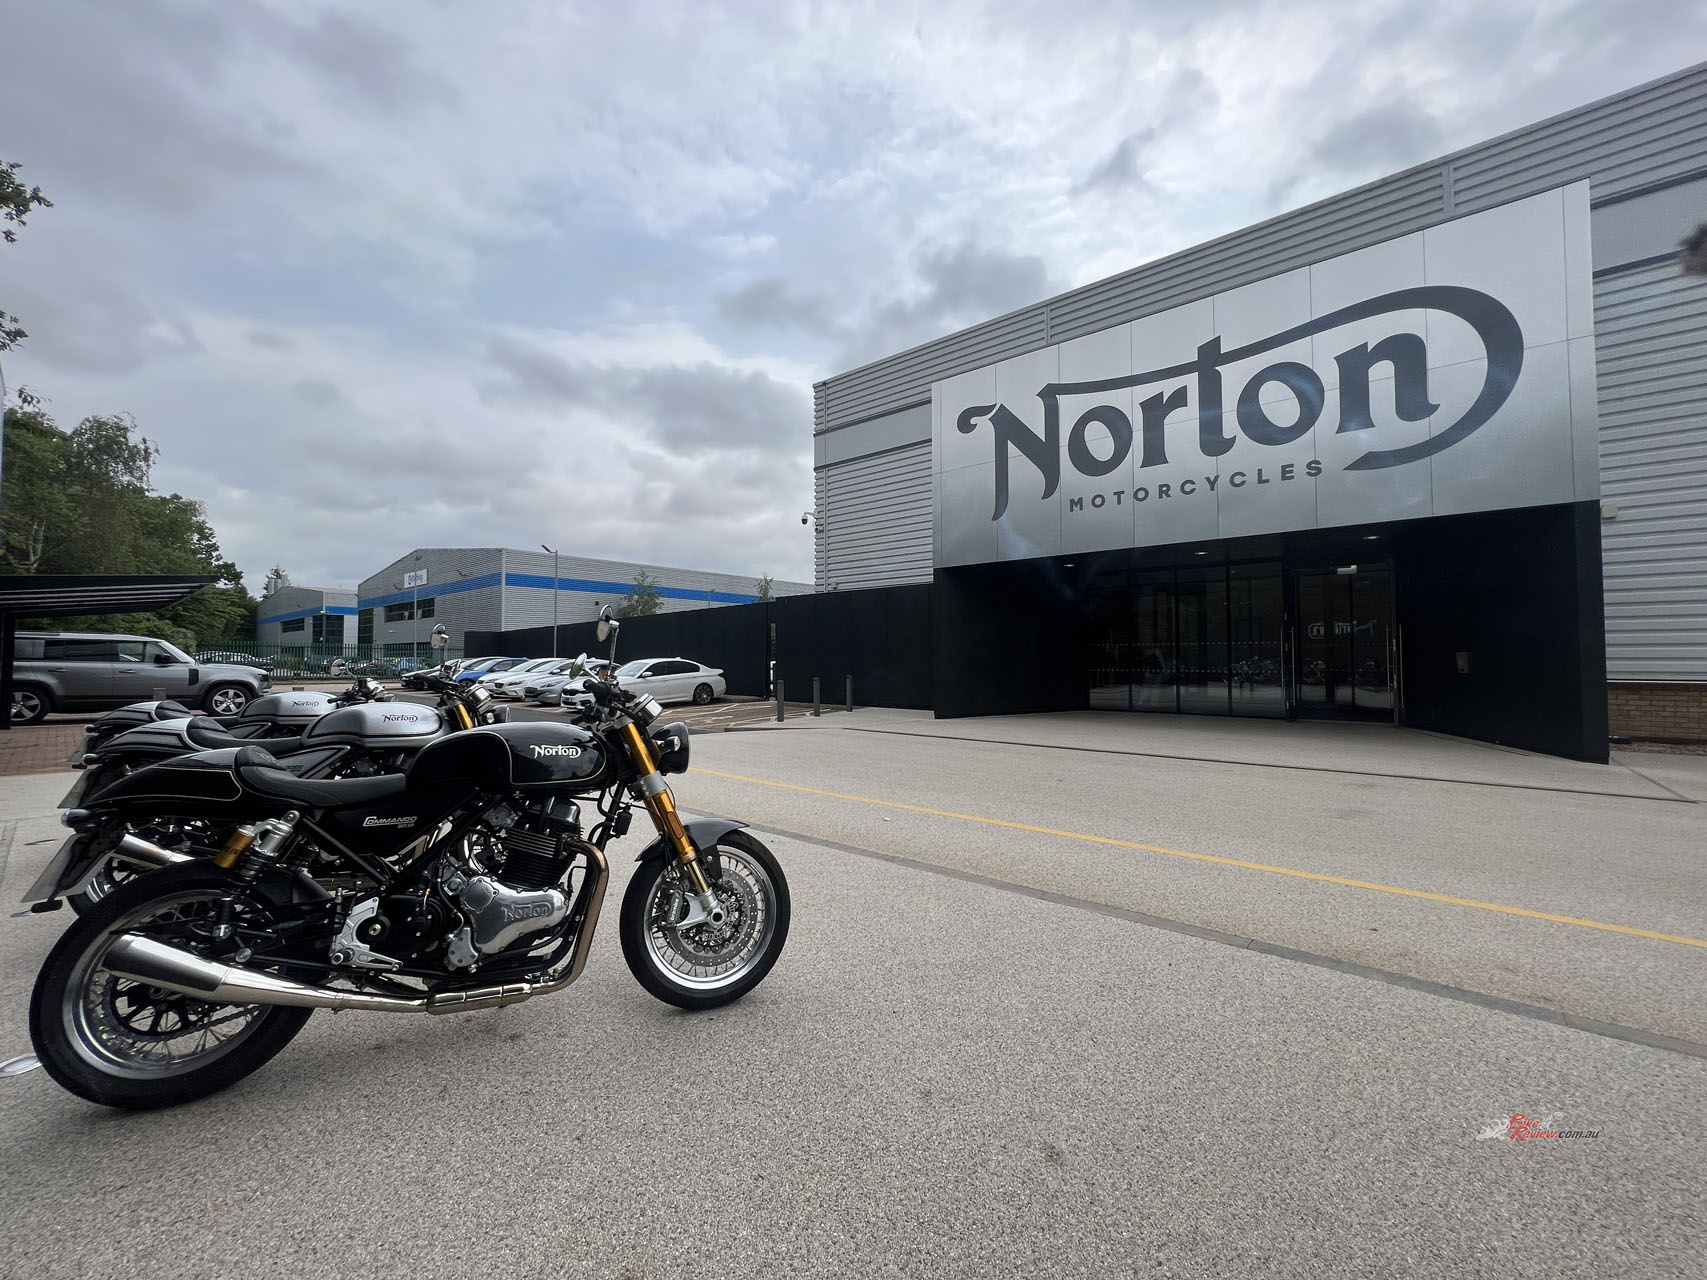 Zane had the extraordinarily lucky experience to ride some of the first bikes out of the TVS Norton ownership.